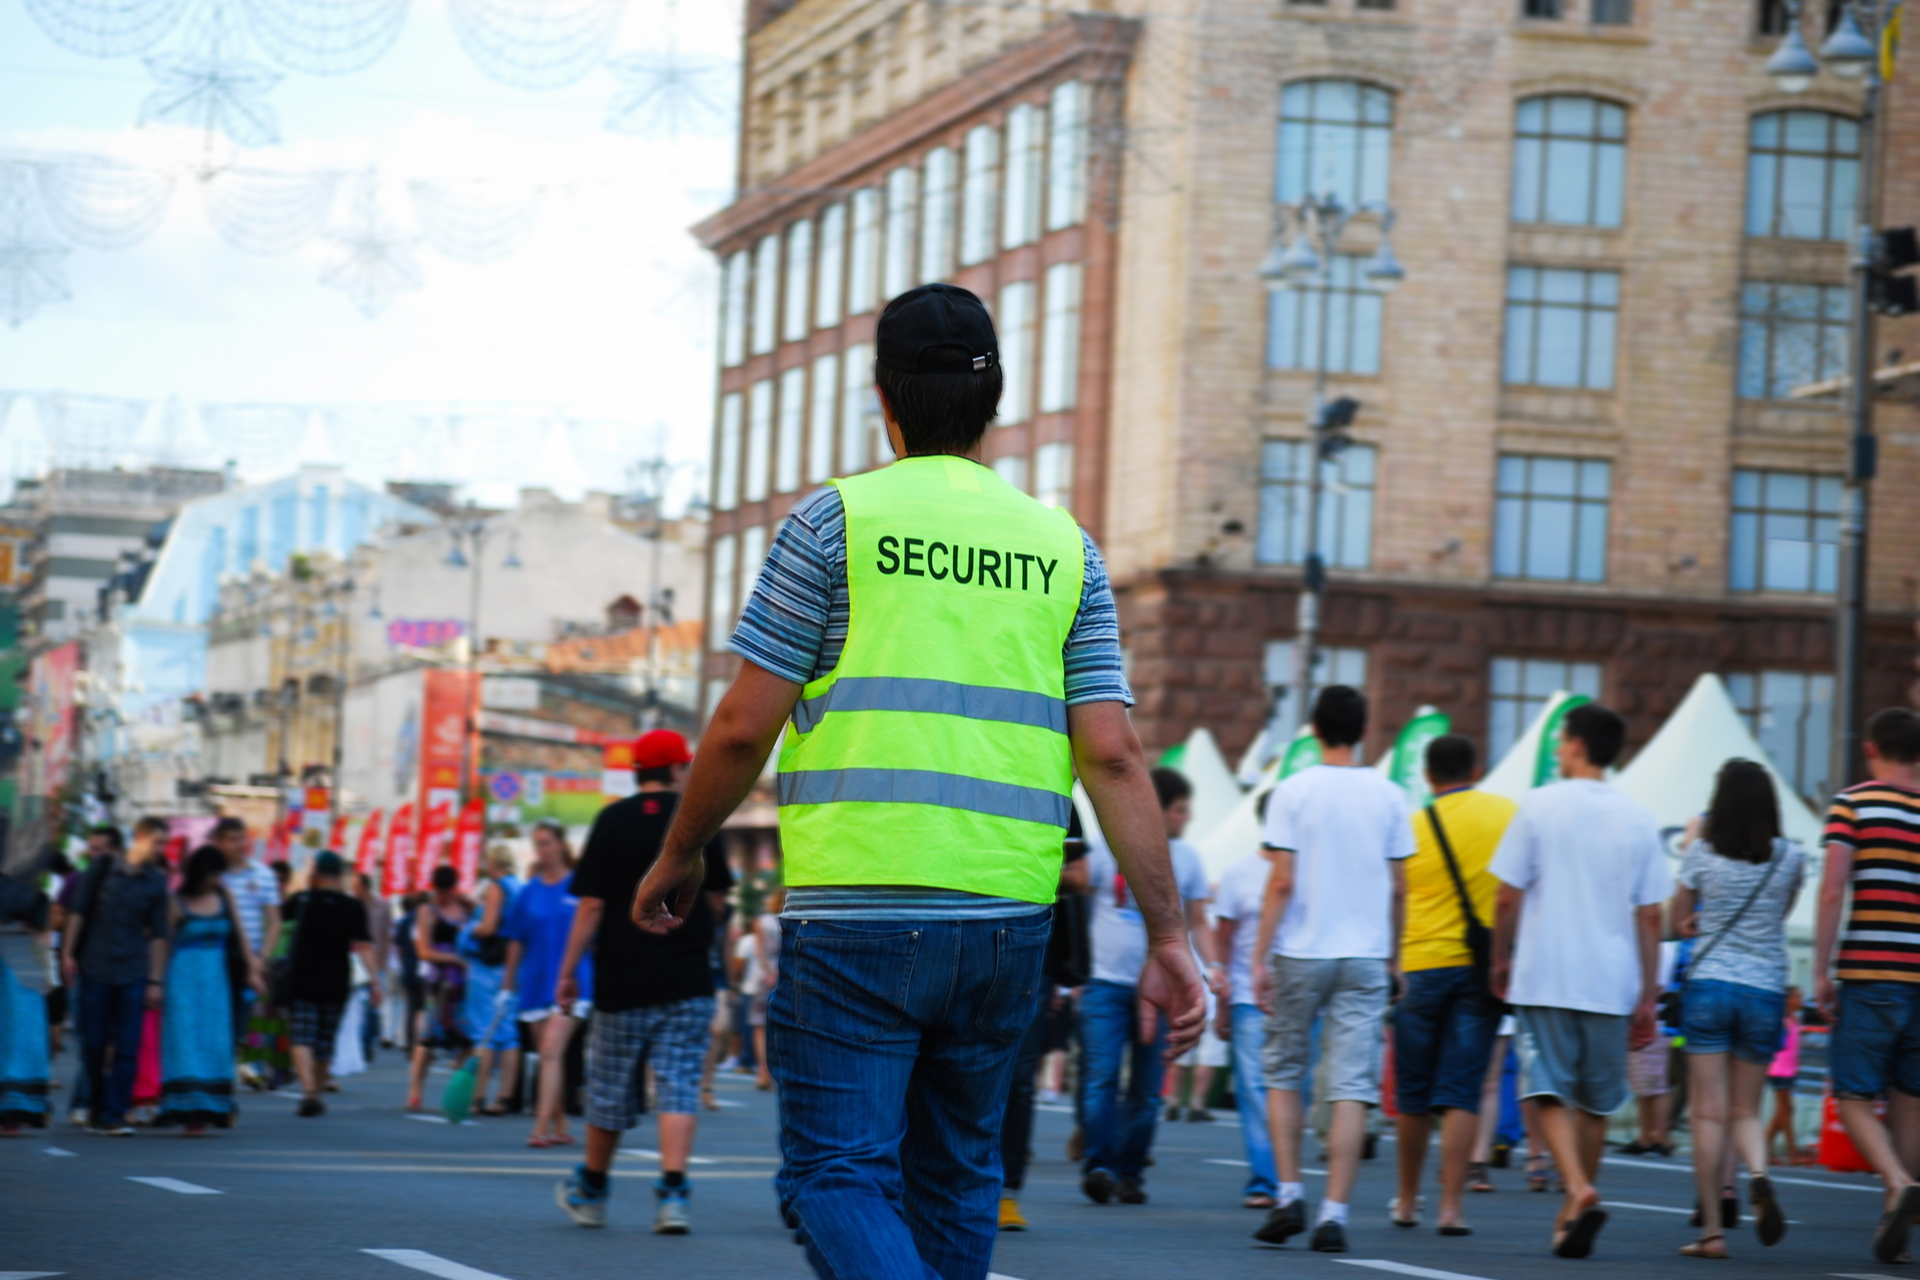 Security guard walking at outdoor public event